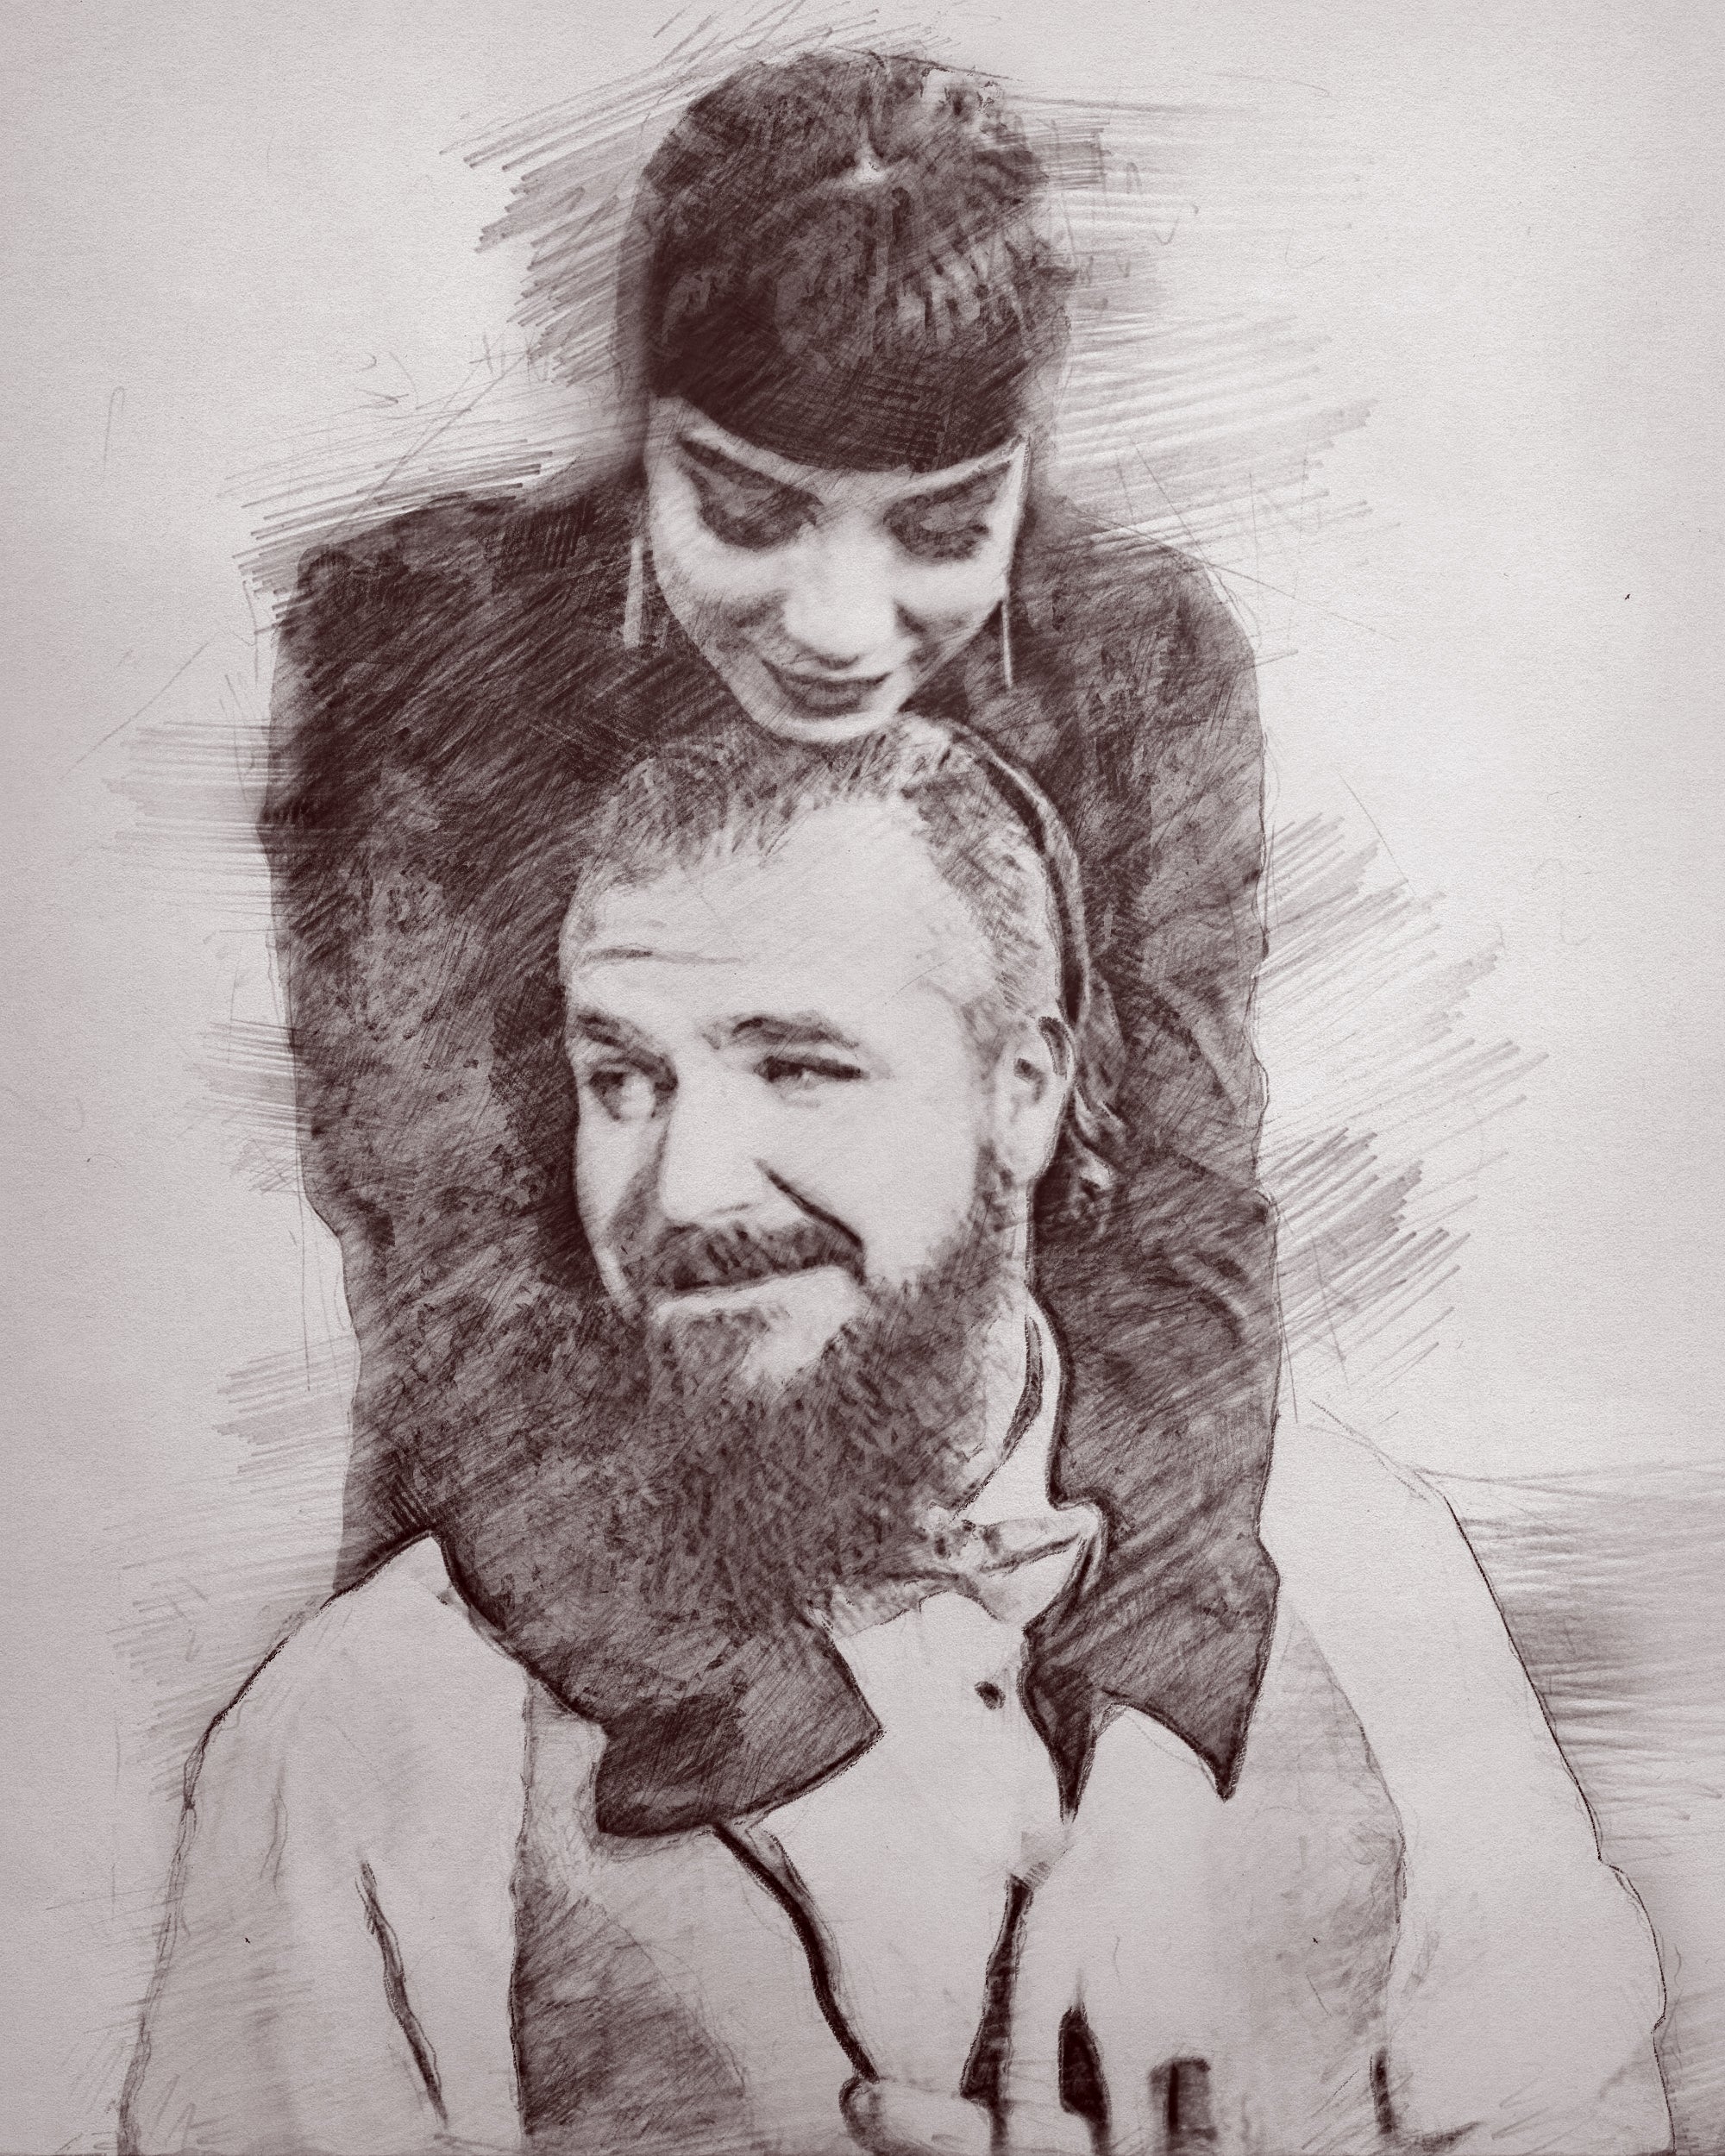 Quarantine Portrait Sketch: Self Portrait (Rough) from 50 Years Ago |  Brotherly Love